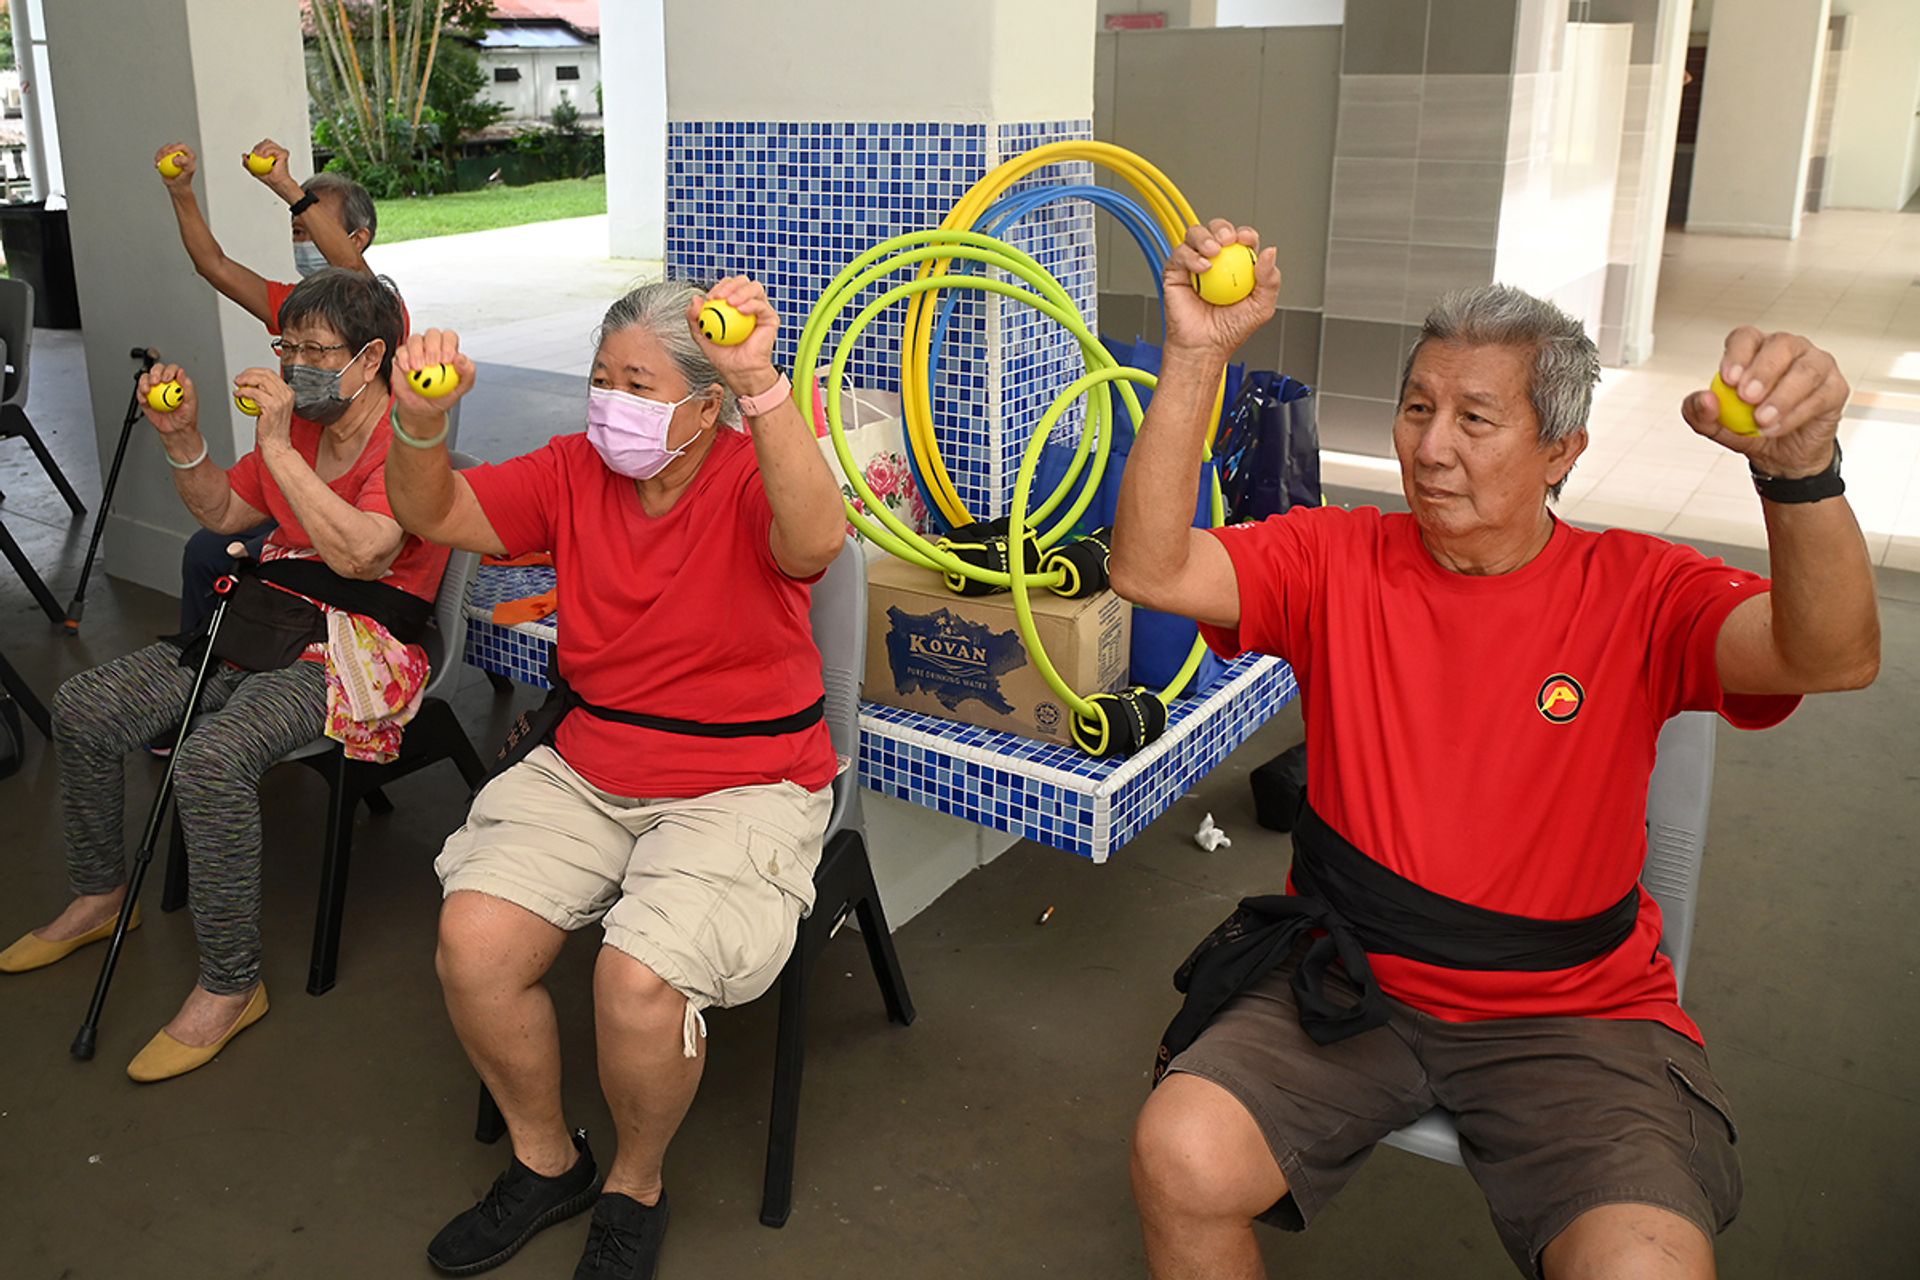 Mr Chia Chiang Teck (right) taking part in a grip strength training exercise using stress balls, alongside fellow seniors.